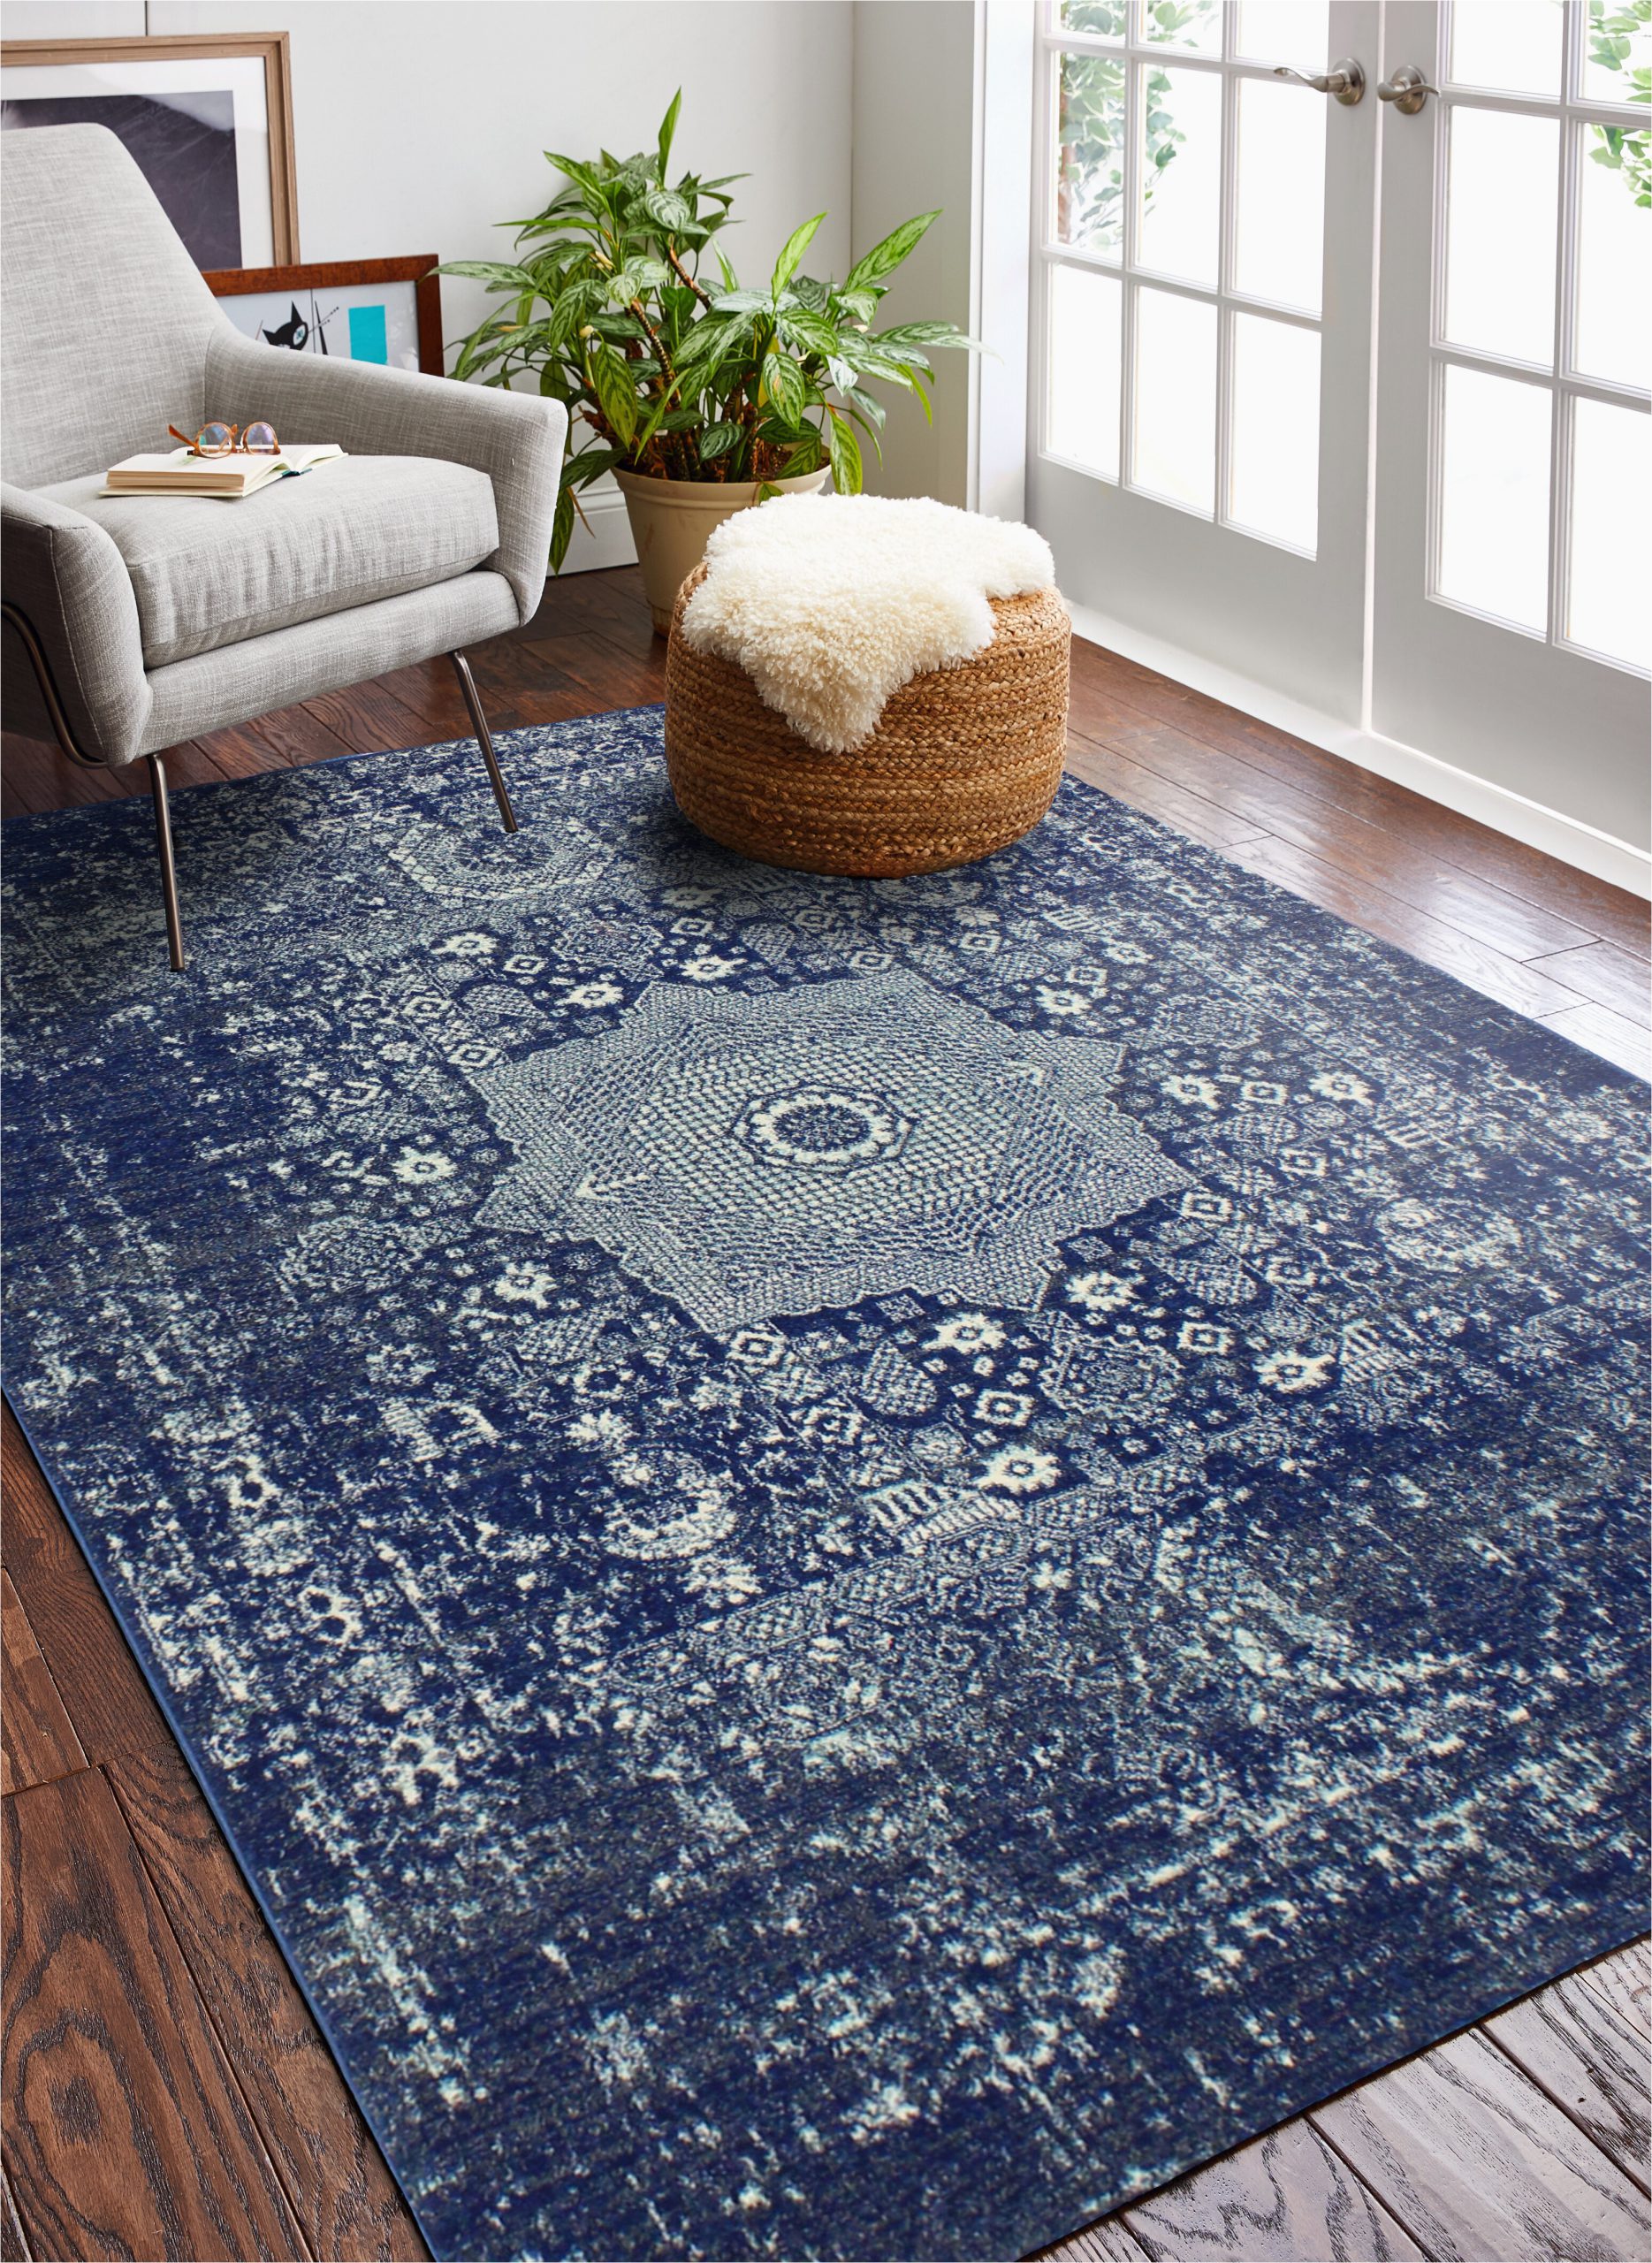 Navy Blue Rugs for Sale Riggs Distressed Dark Blue area Rug